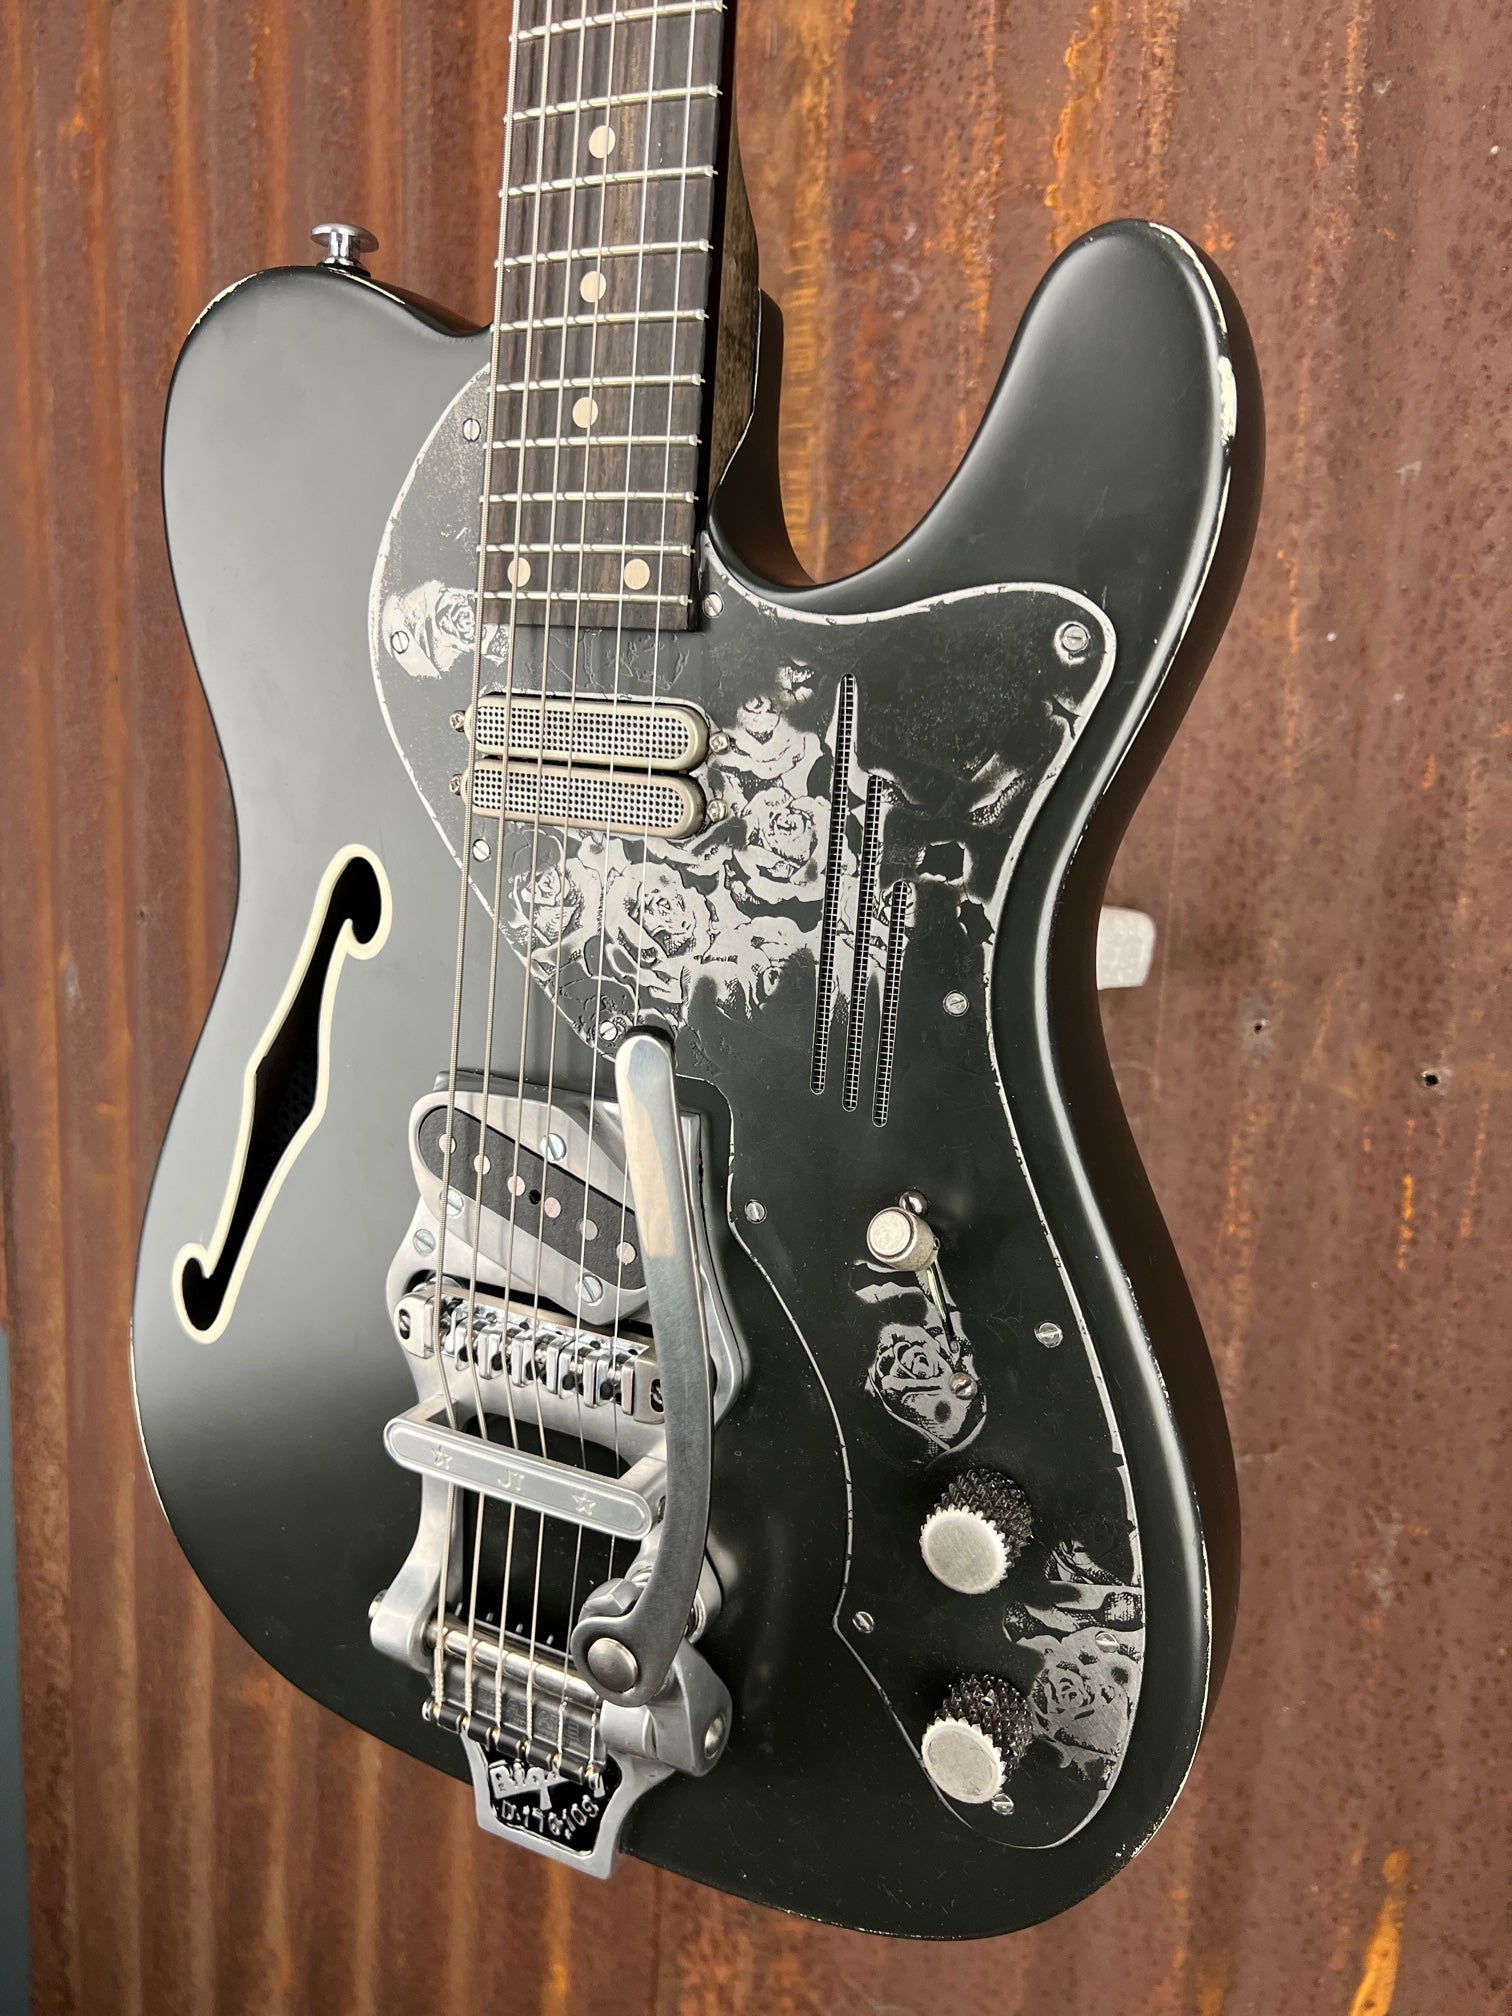 22085 Black Satin Roses Deluxe SteelCaster with B16 Bigsby